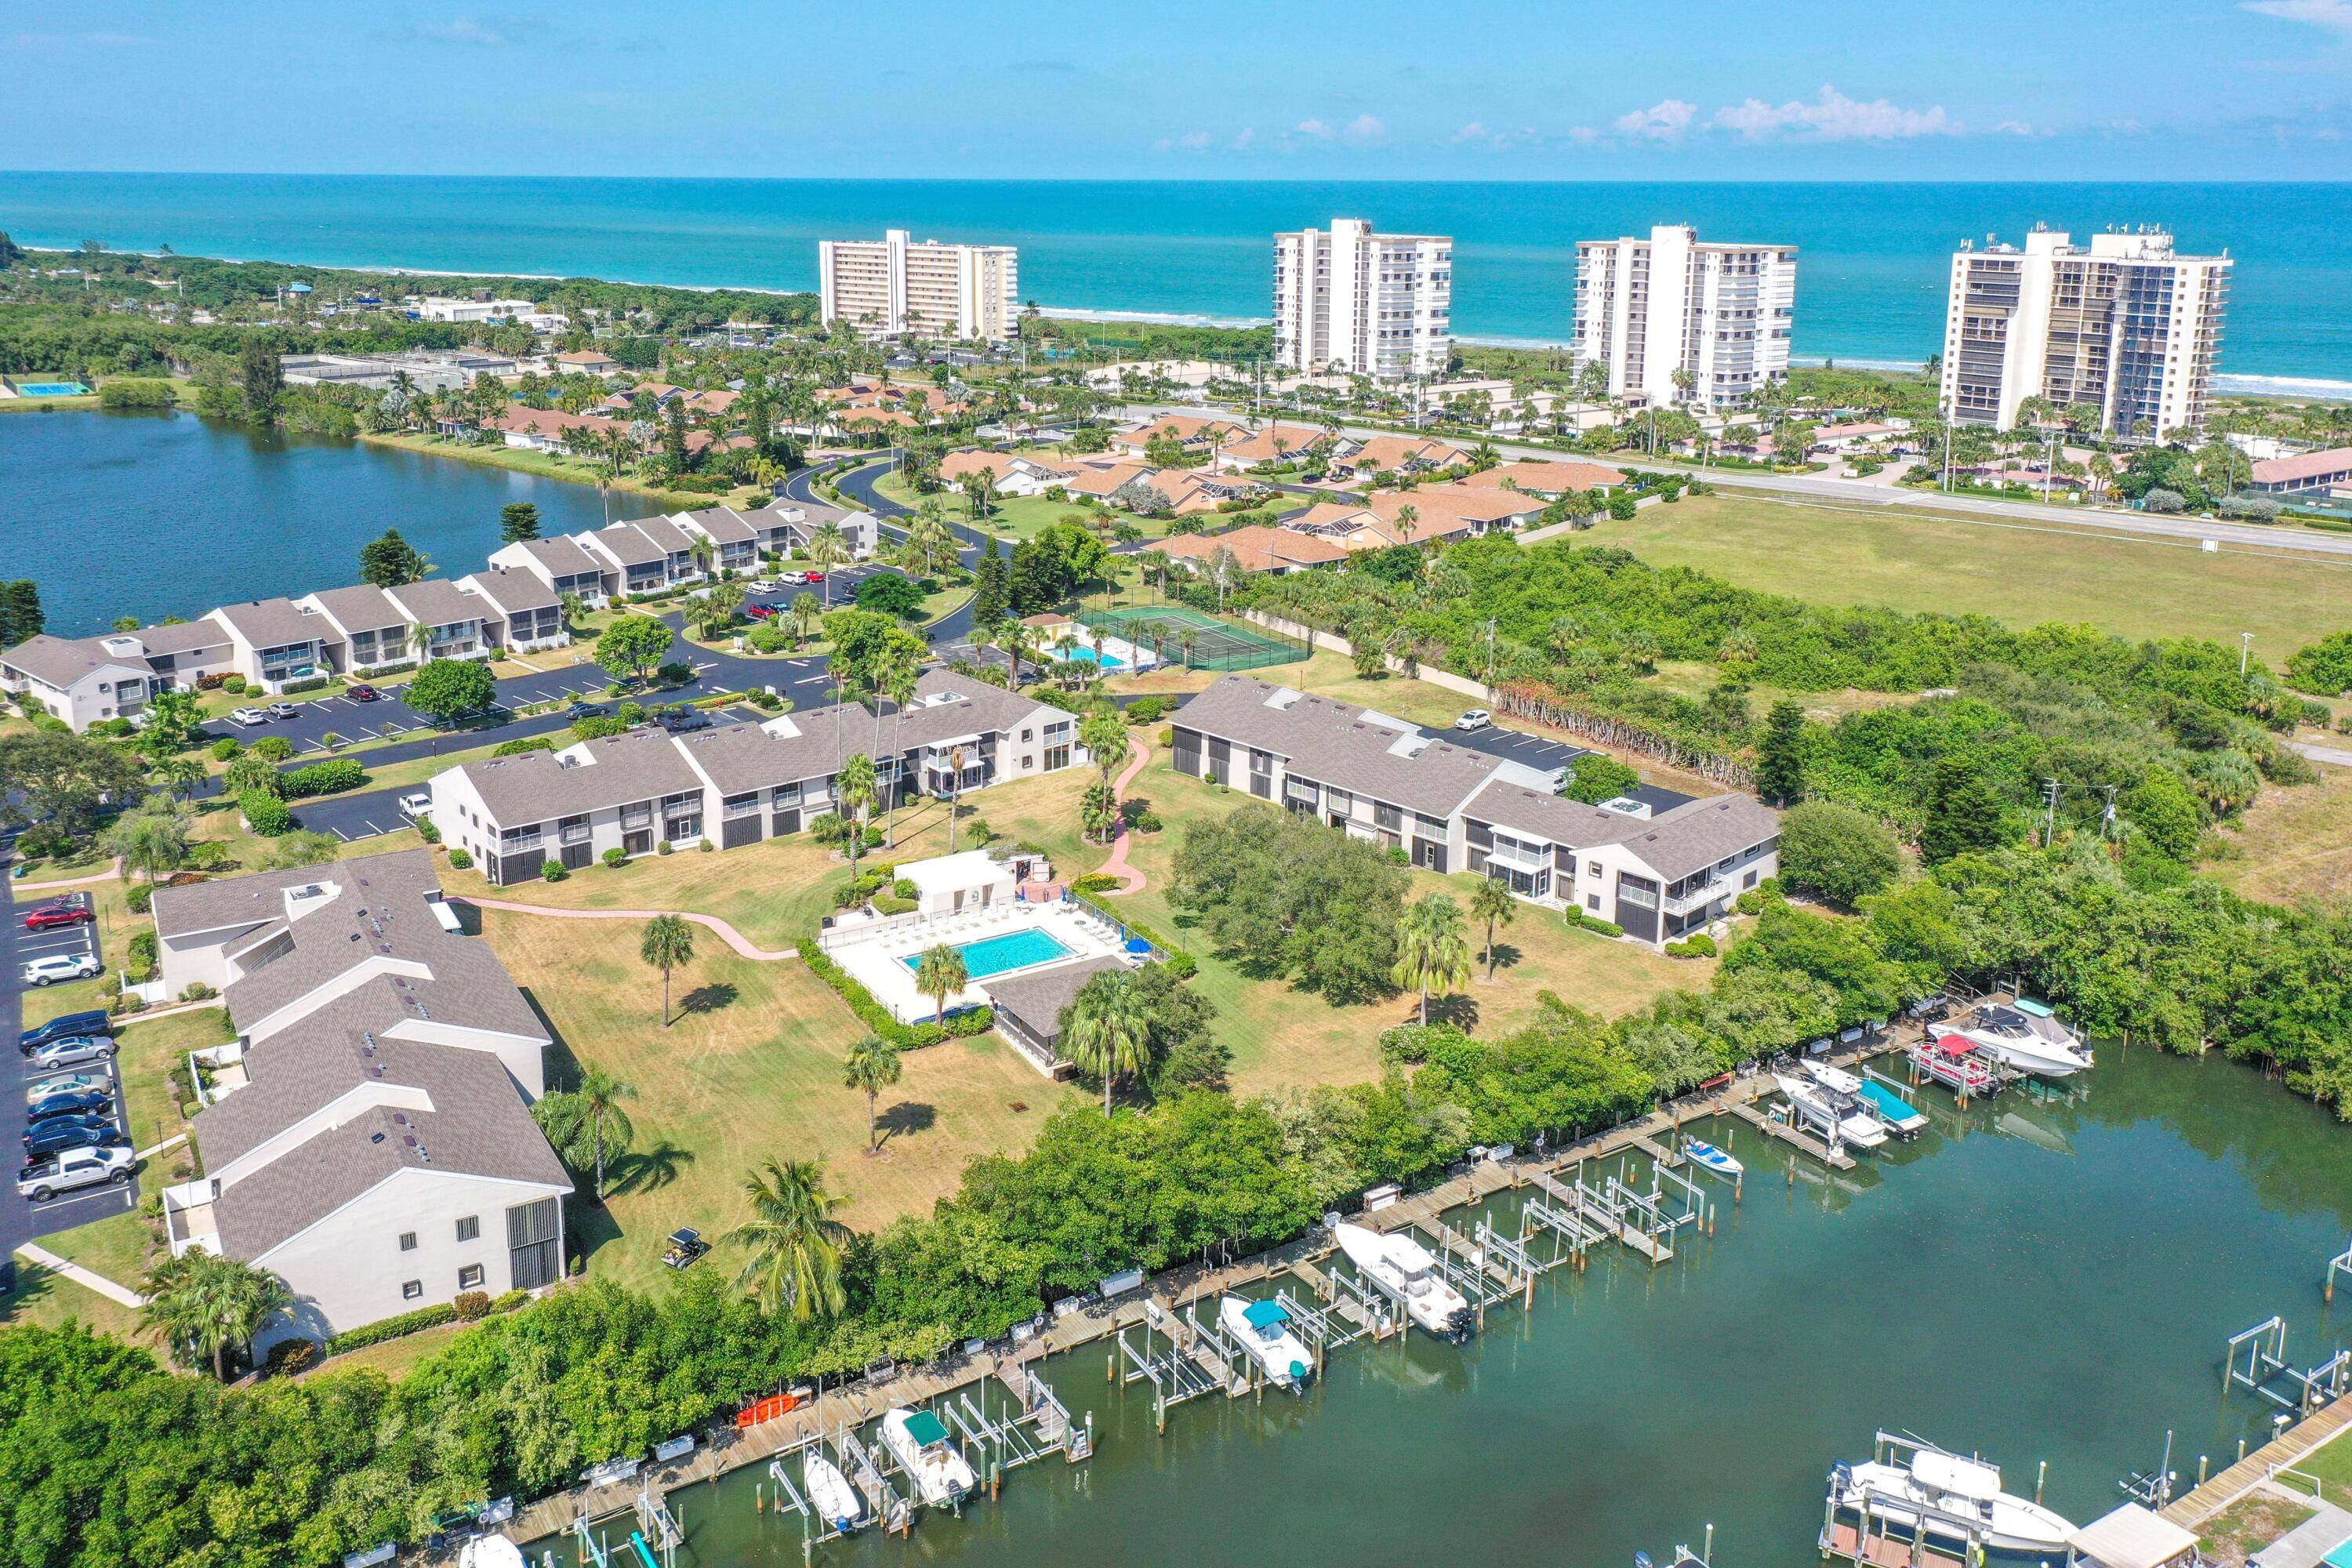 Welcome home to your island life in the beautiful community of The Sands.